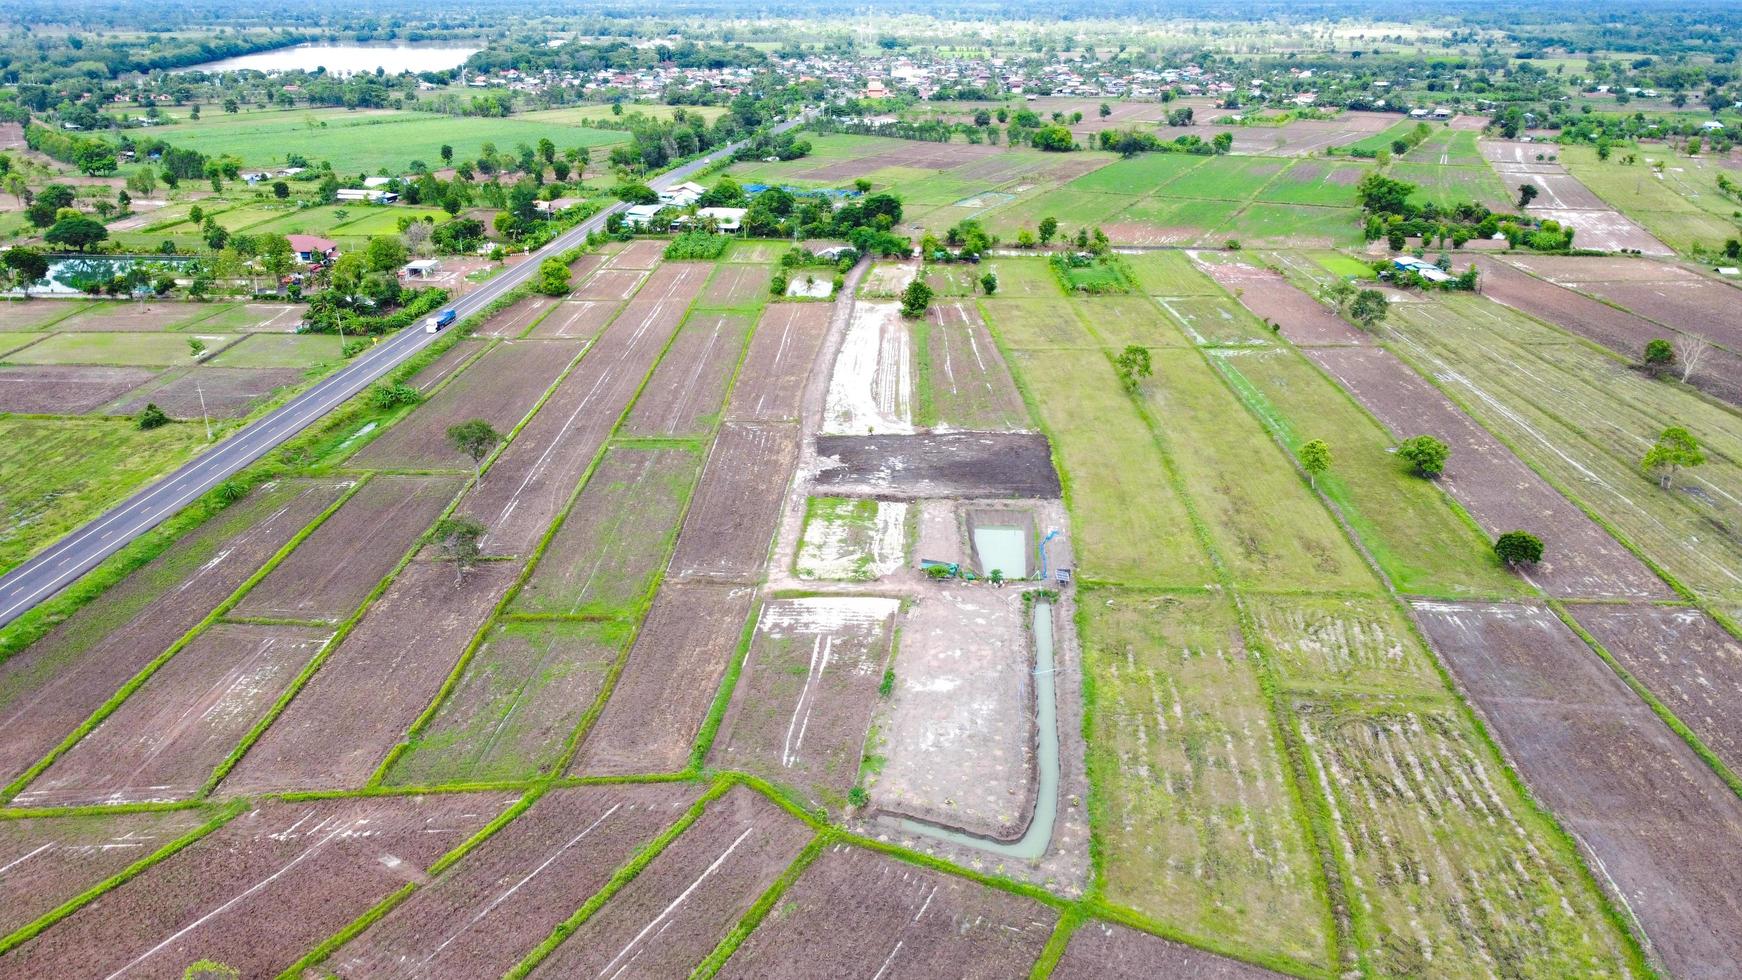 Aerial view of green fields and farmlands in rural Thailand. photo